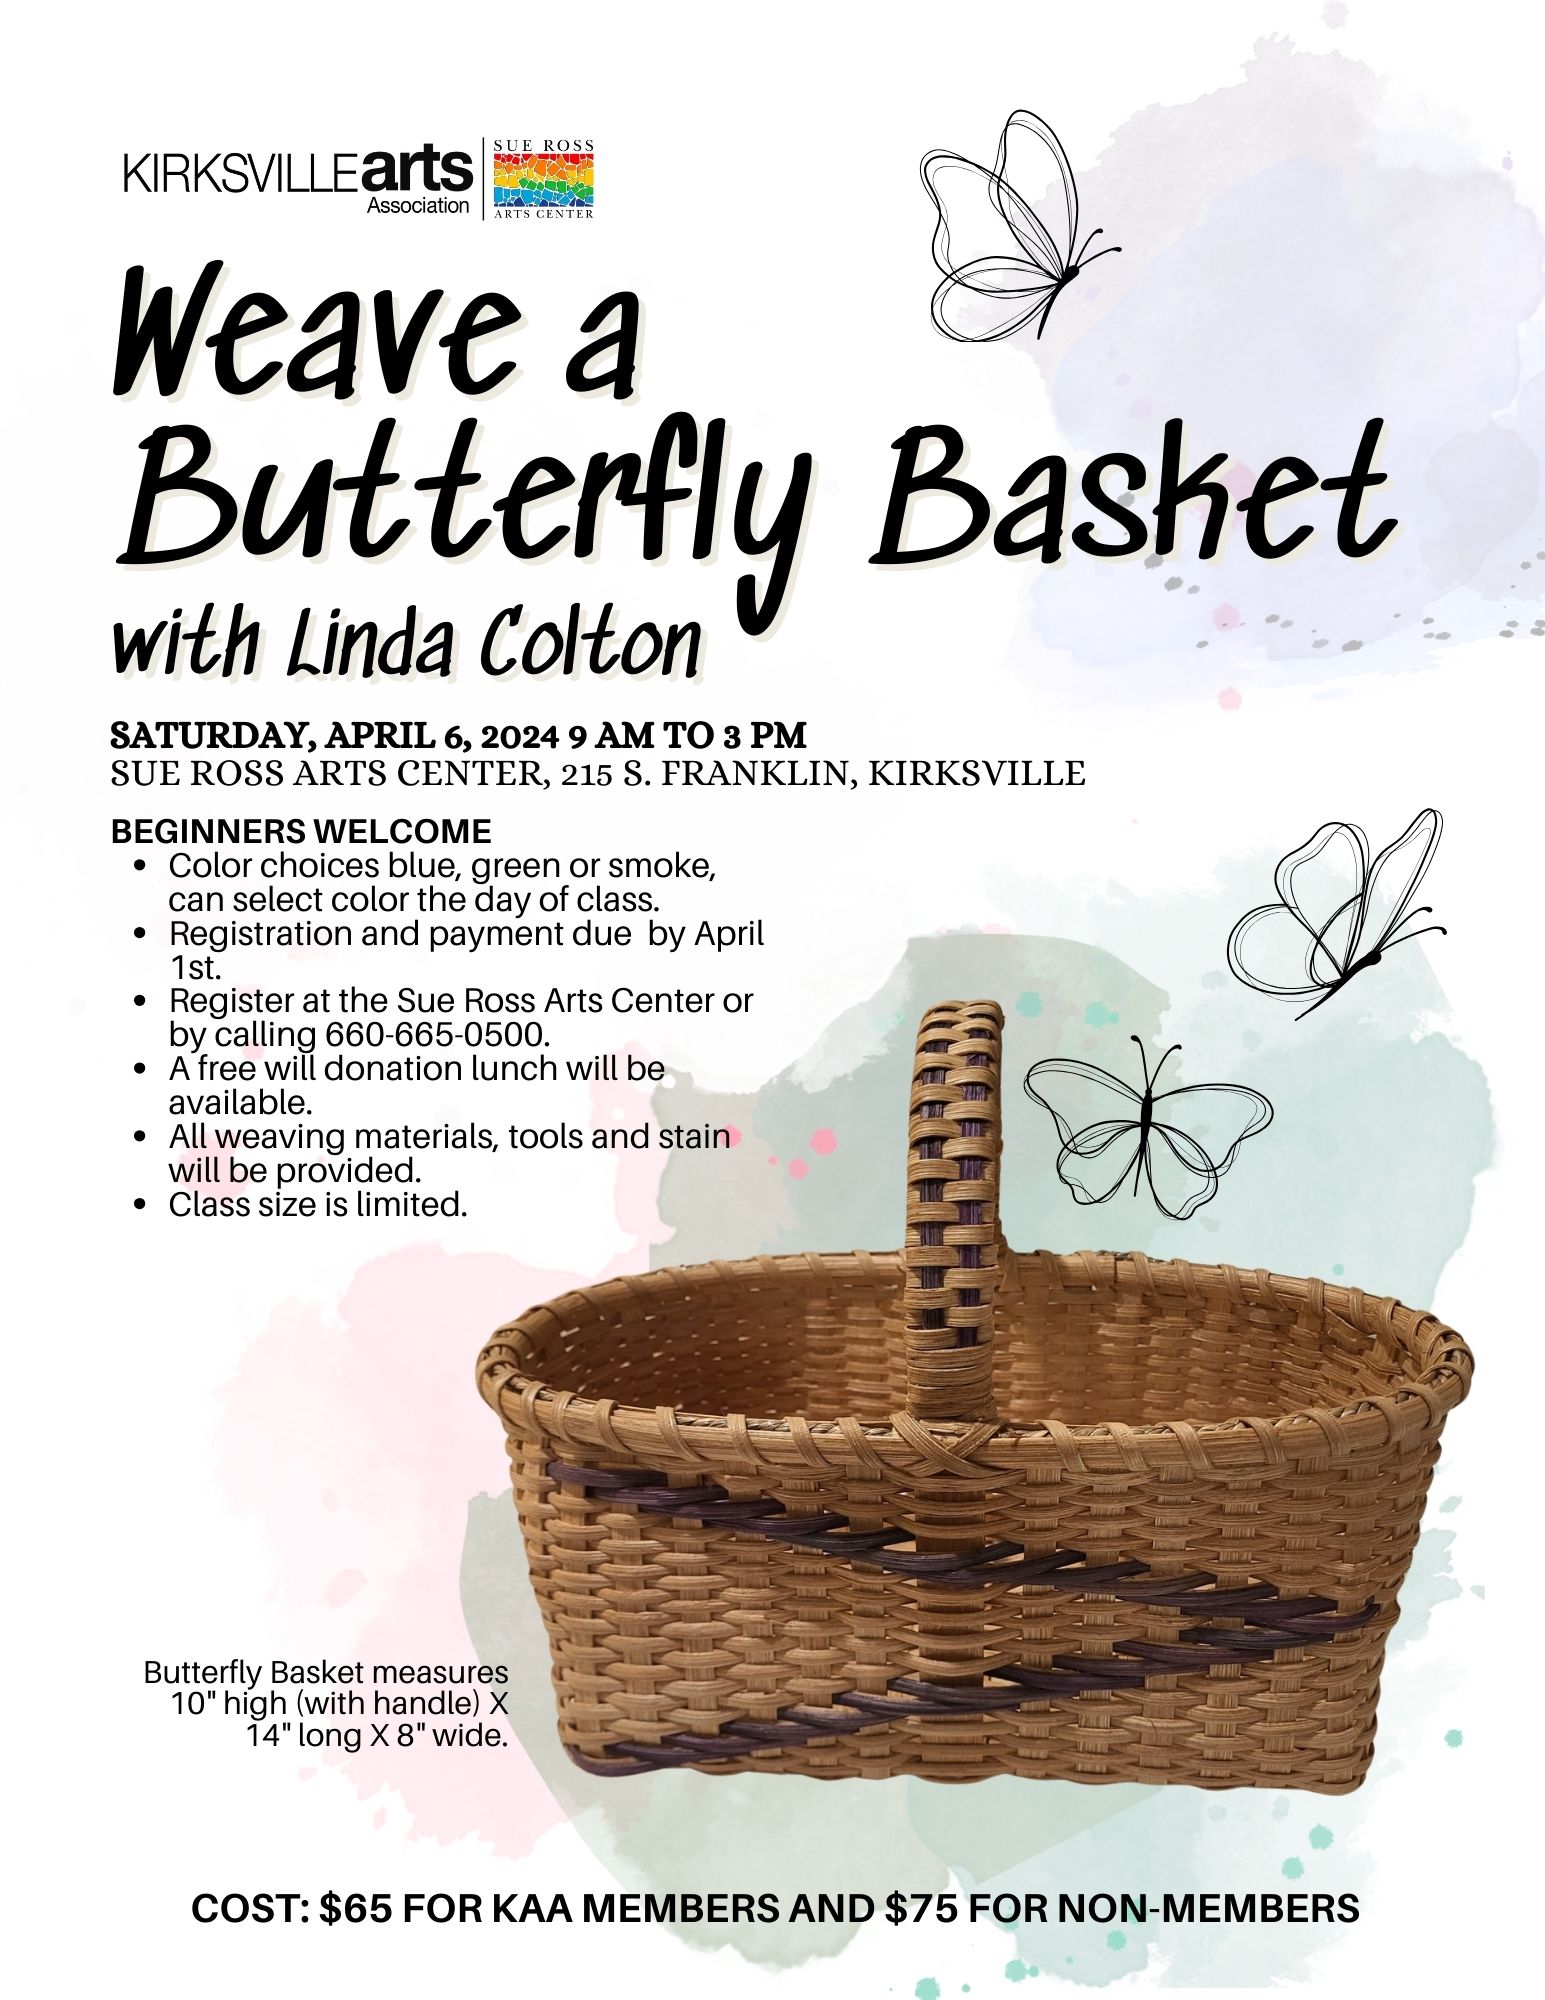 Check more about Weave a Butterfly Basket